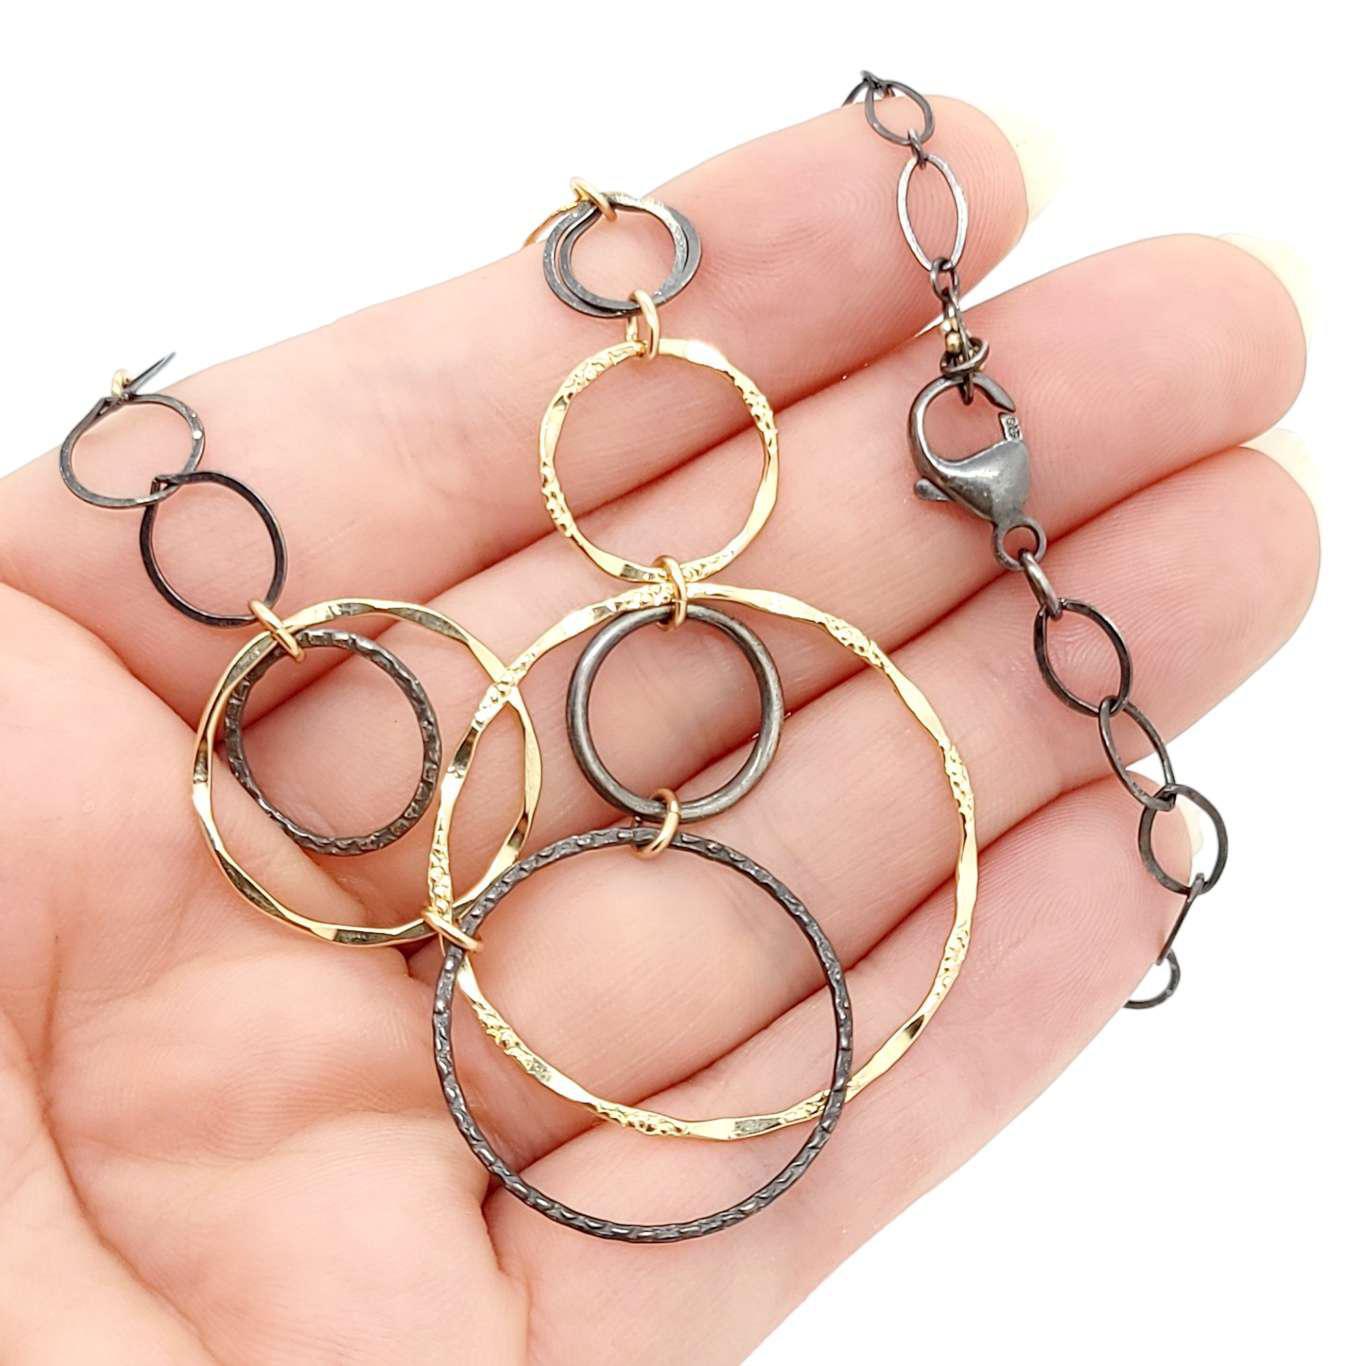 Necklace - Mixed Metal Circles by Calliope Jewelry